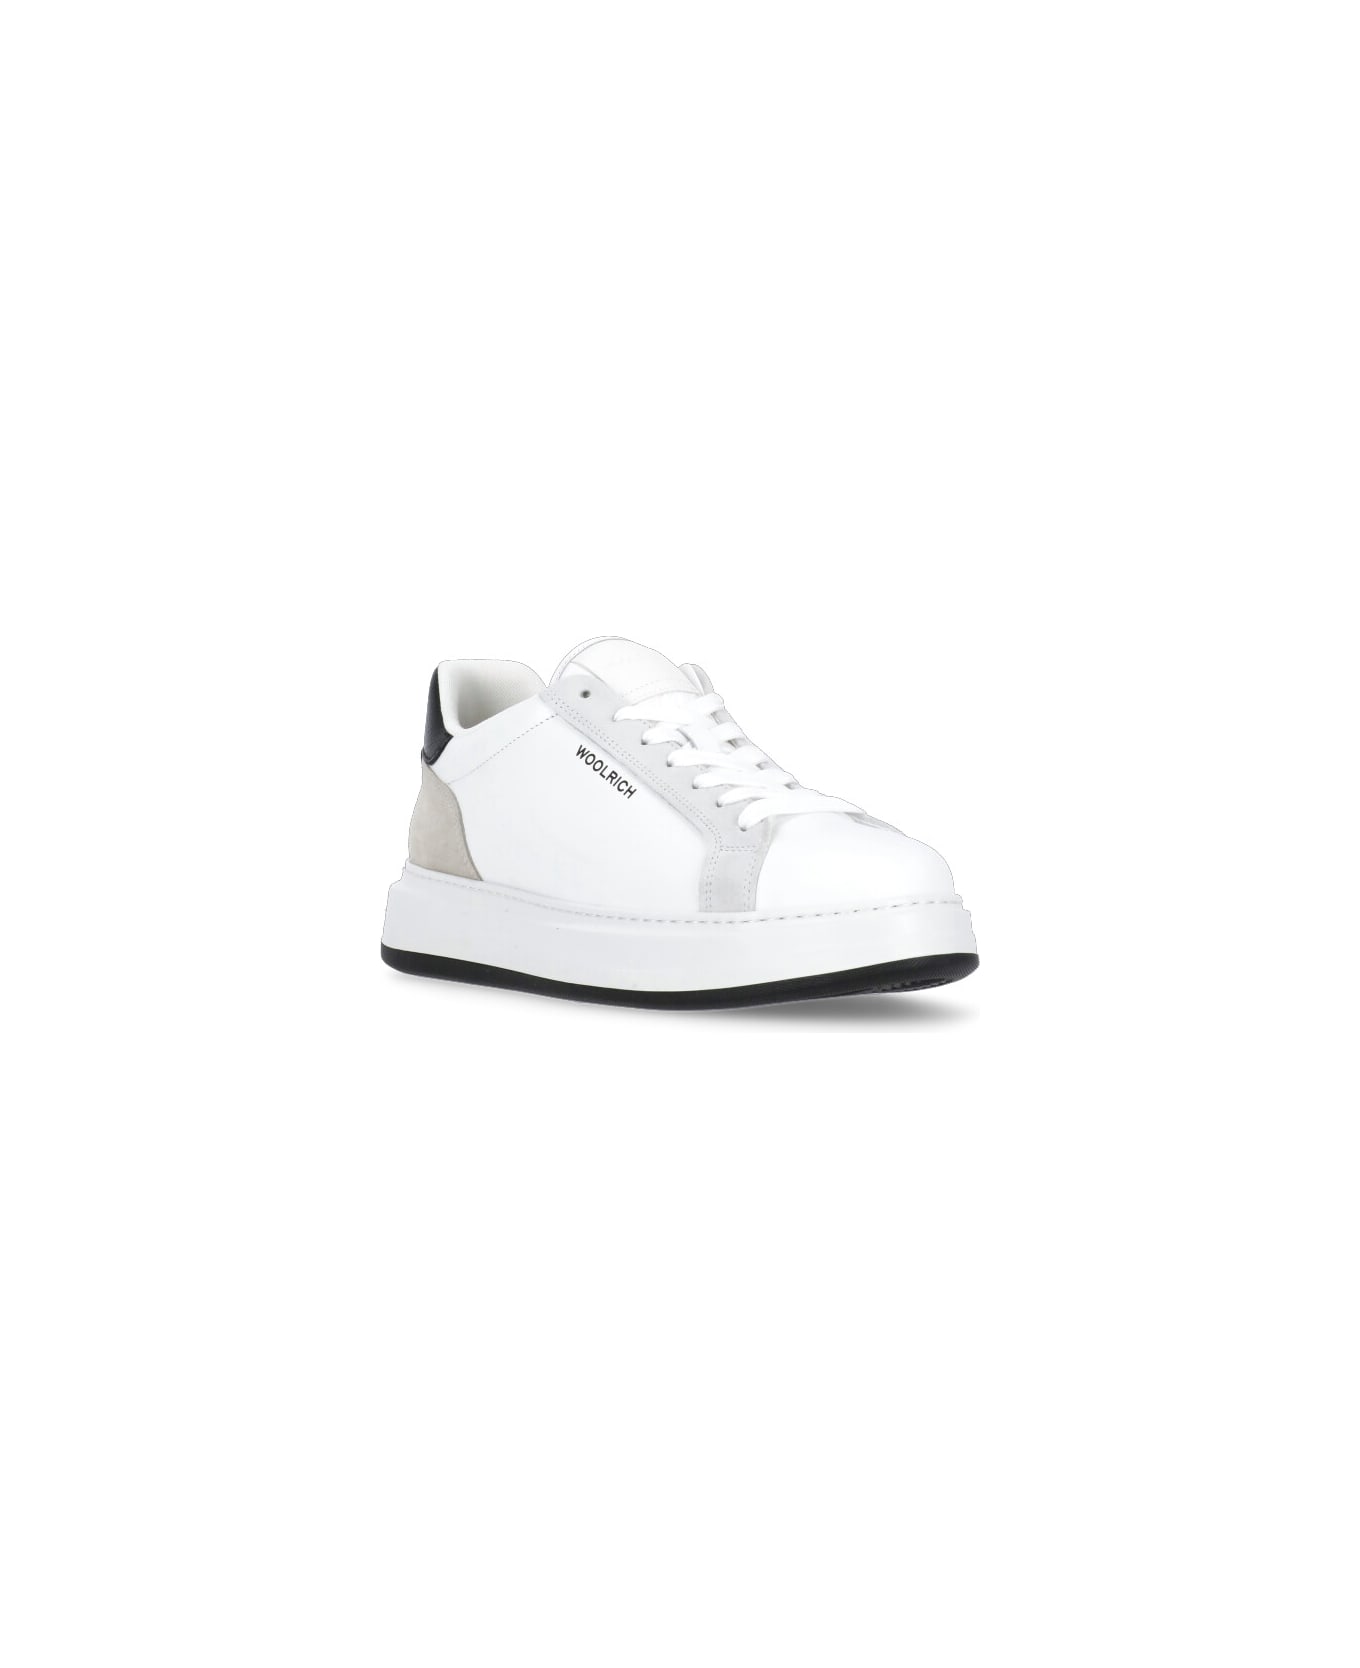 Woolrich 'arrow' Leather Sneakers - White